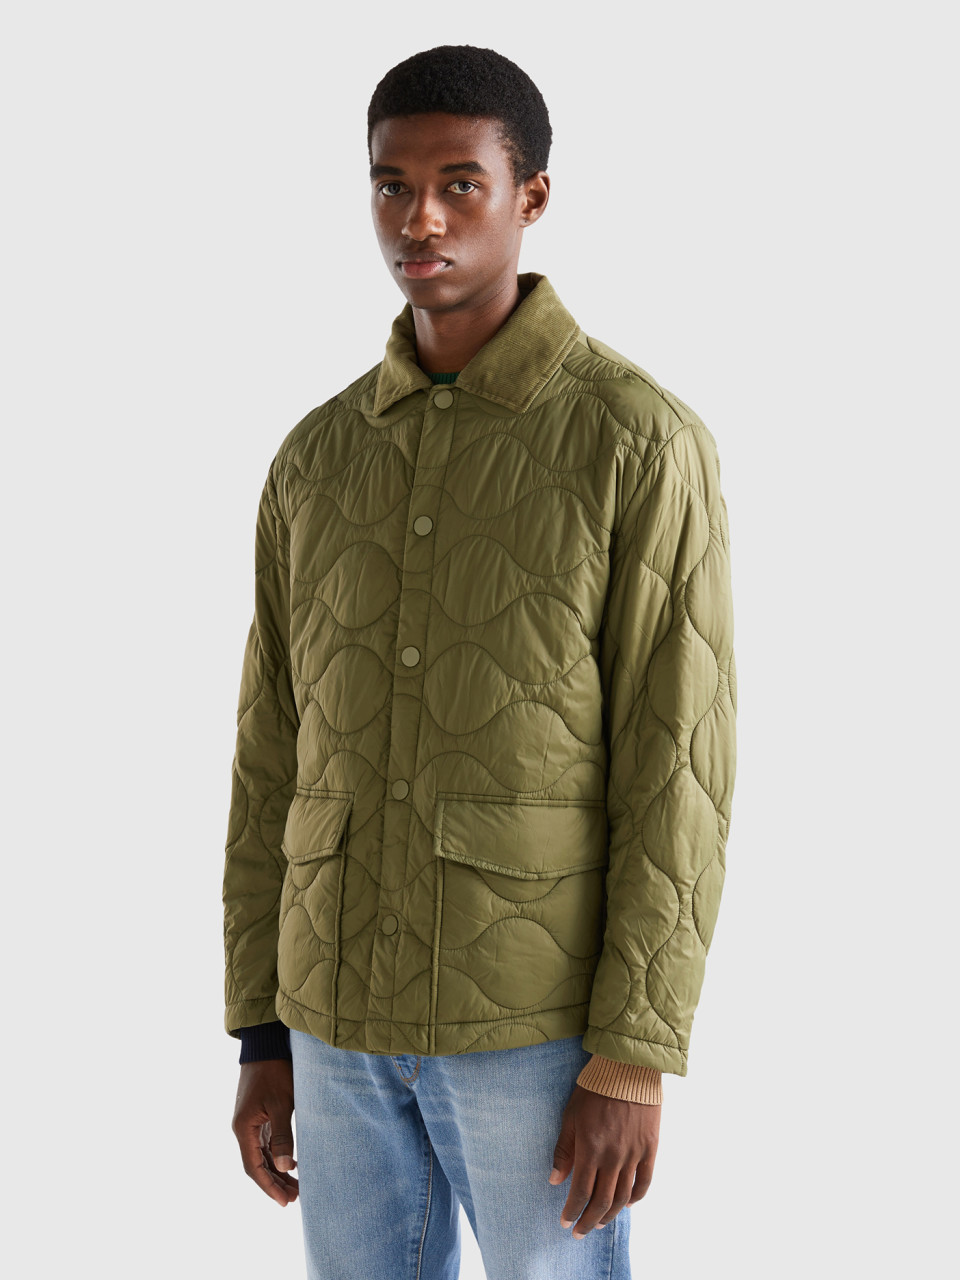 Benetton, Quilted Jacket With Collar, Military Green, Men